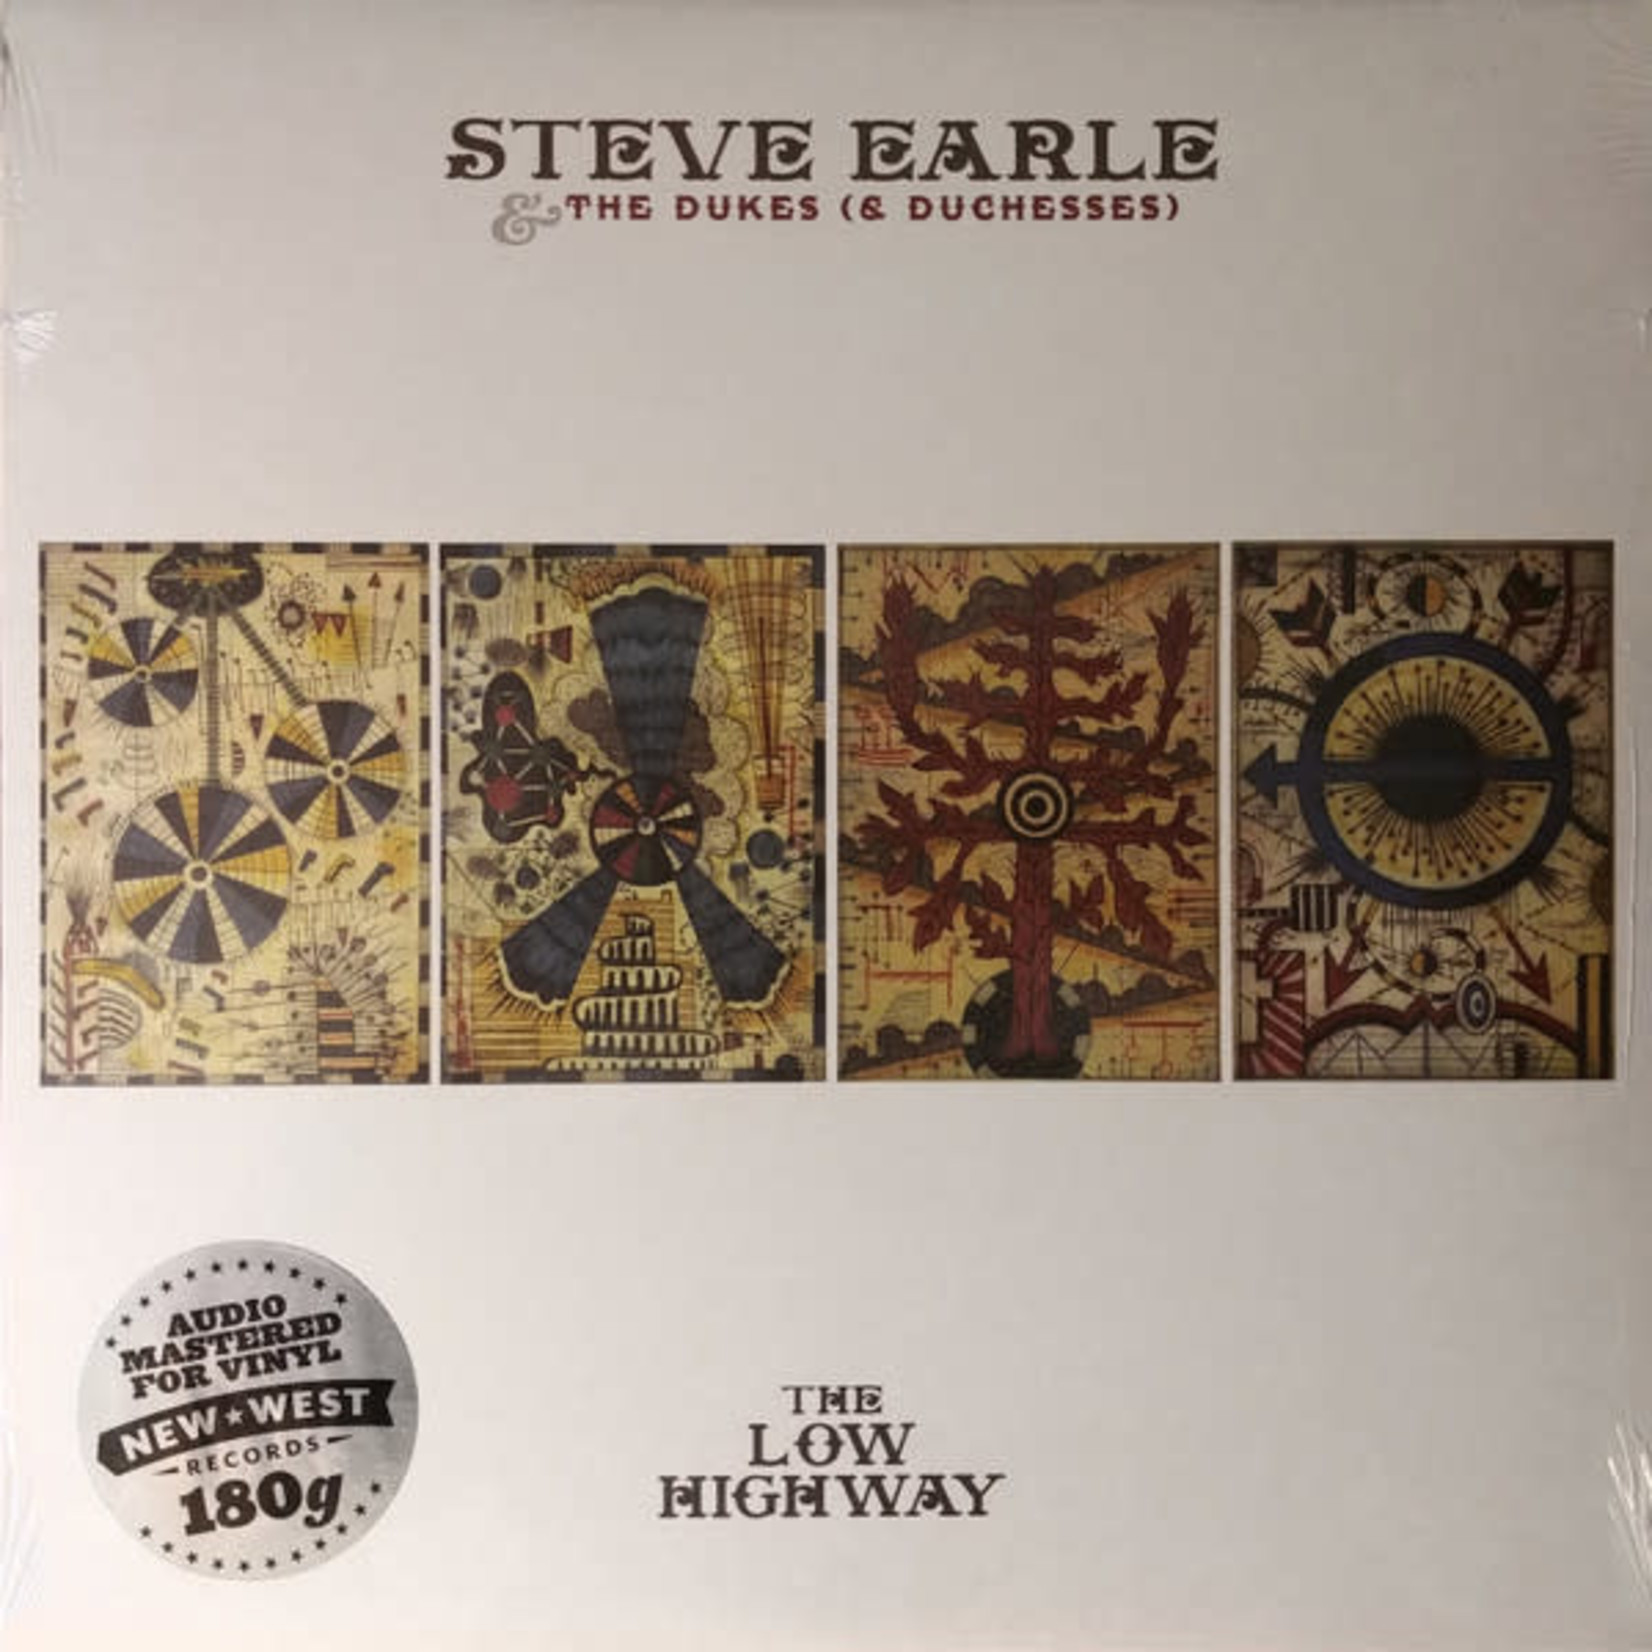 New West Steve Earle & The Dukes - The Low Highway (LP)